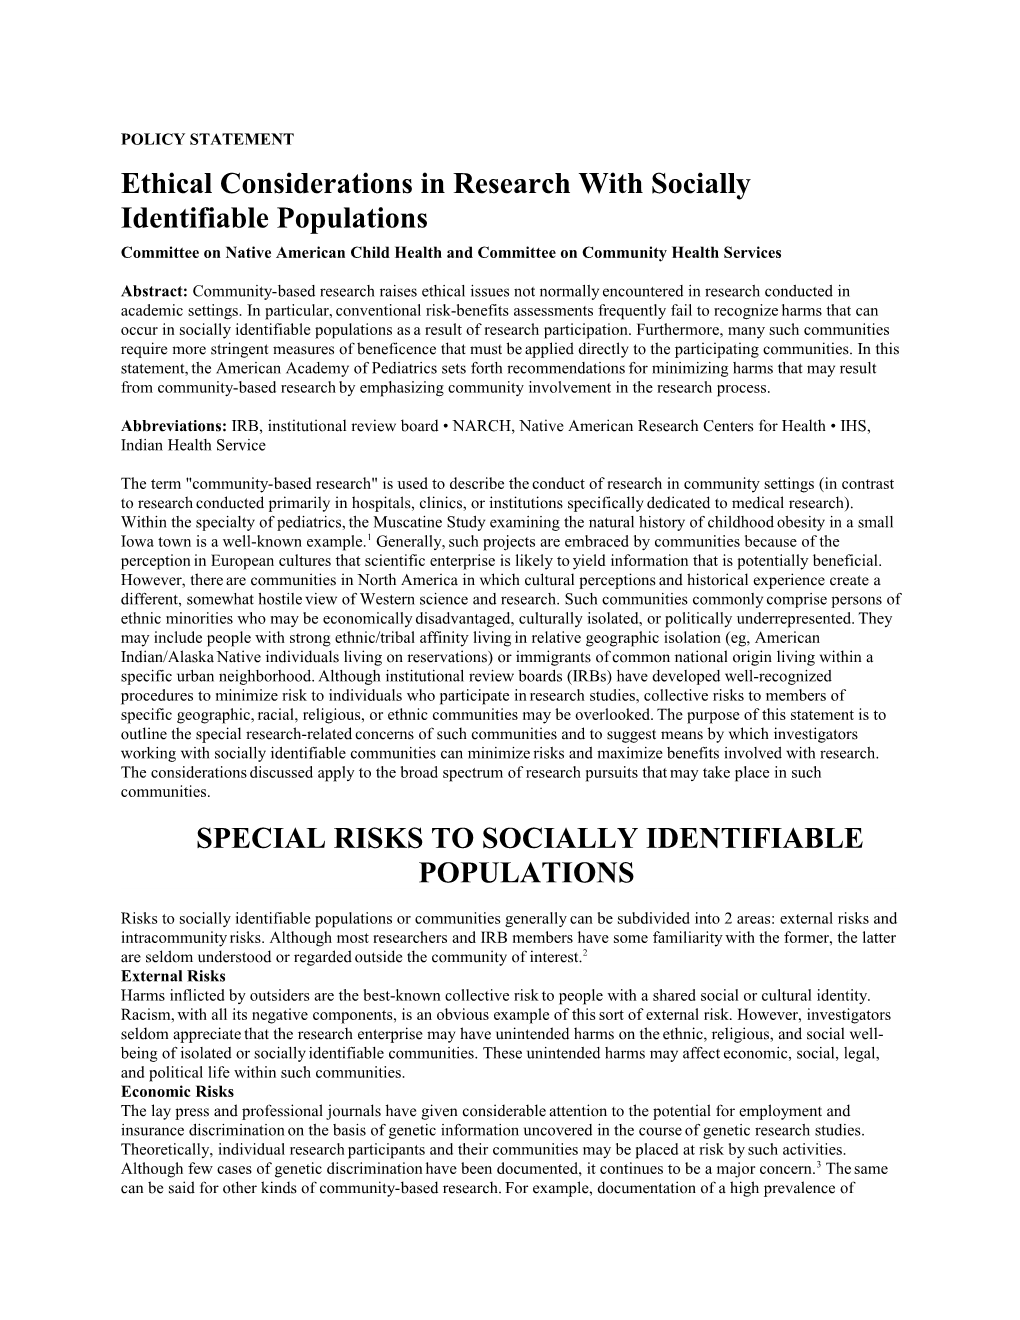 Ethical Considerations in Research with Socially Identifiable Populations